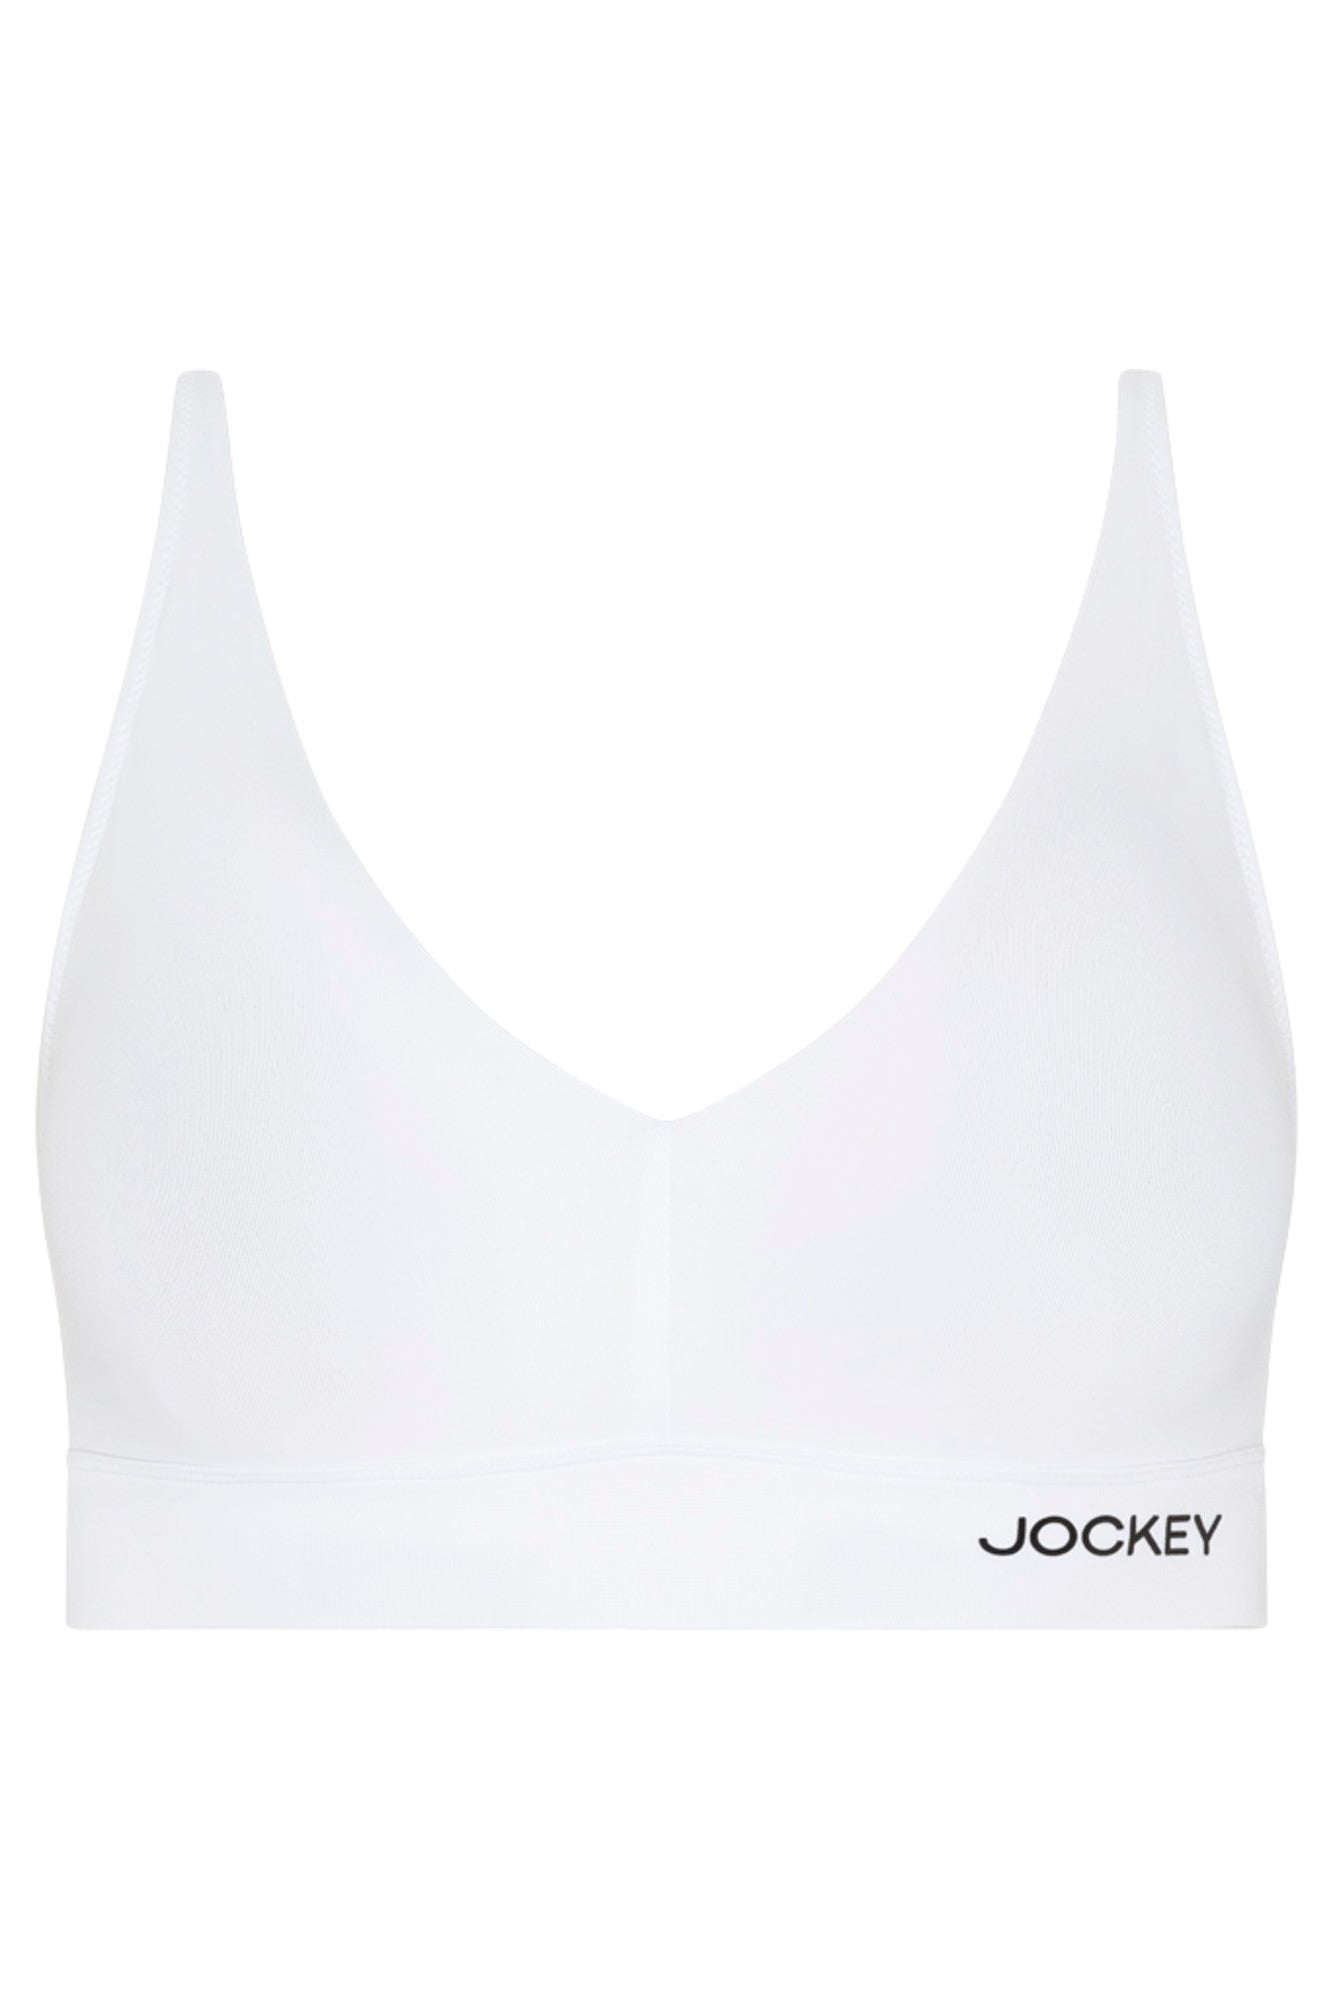 Jockey Women's Natural Beauty Removable Cup Bralette With Back C L White :  Target